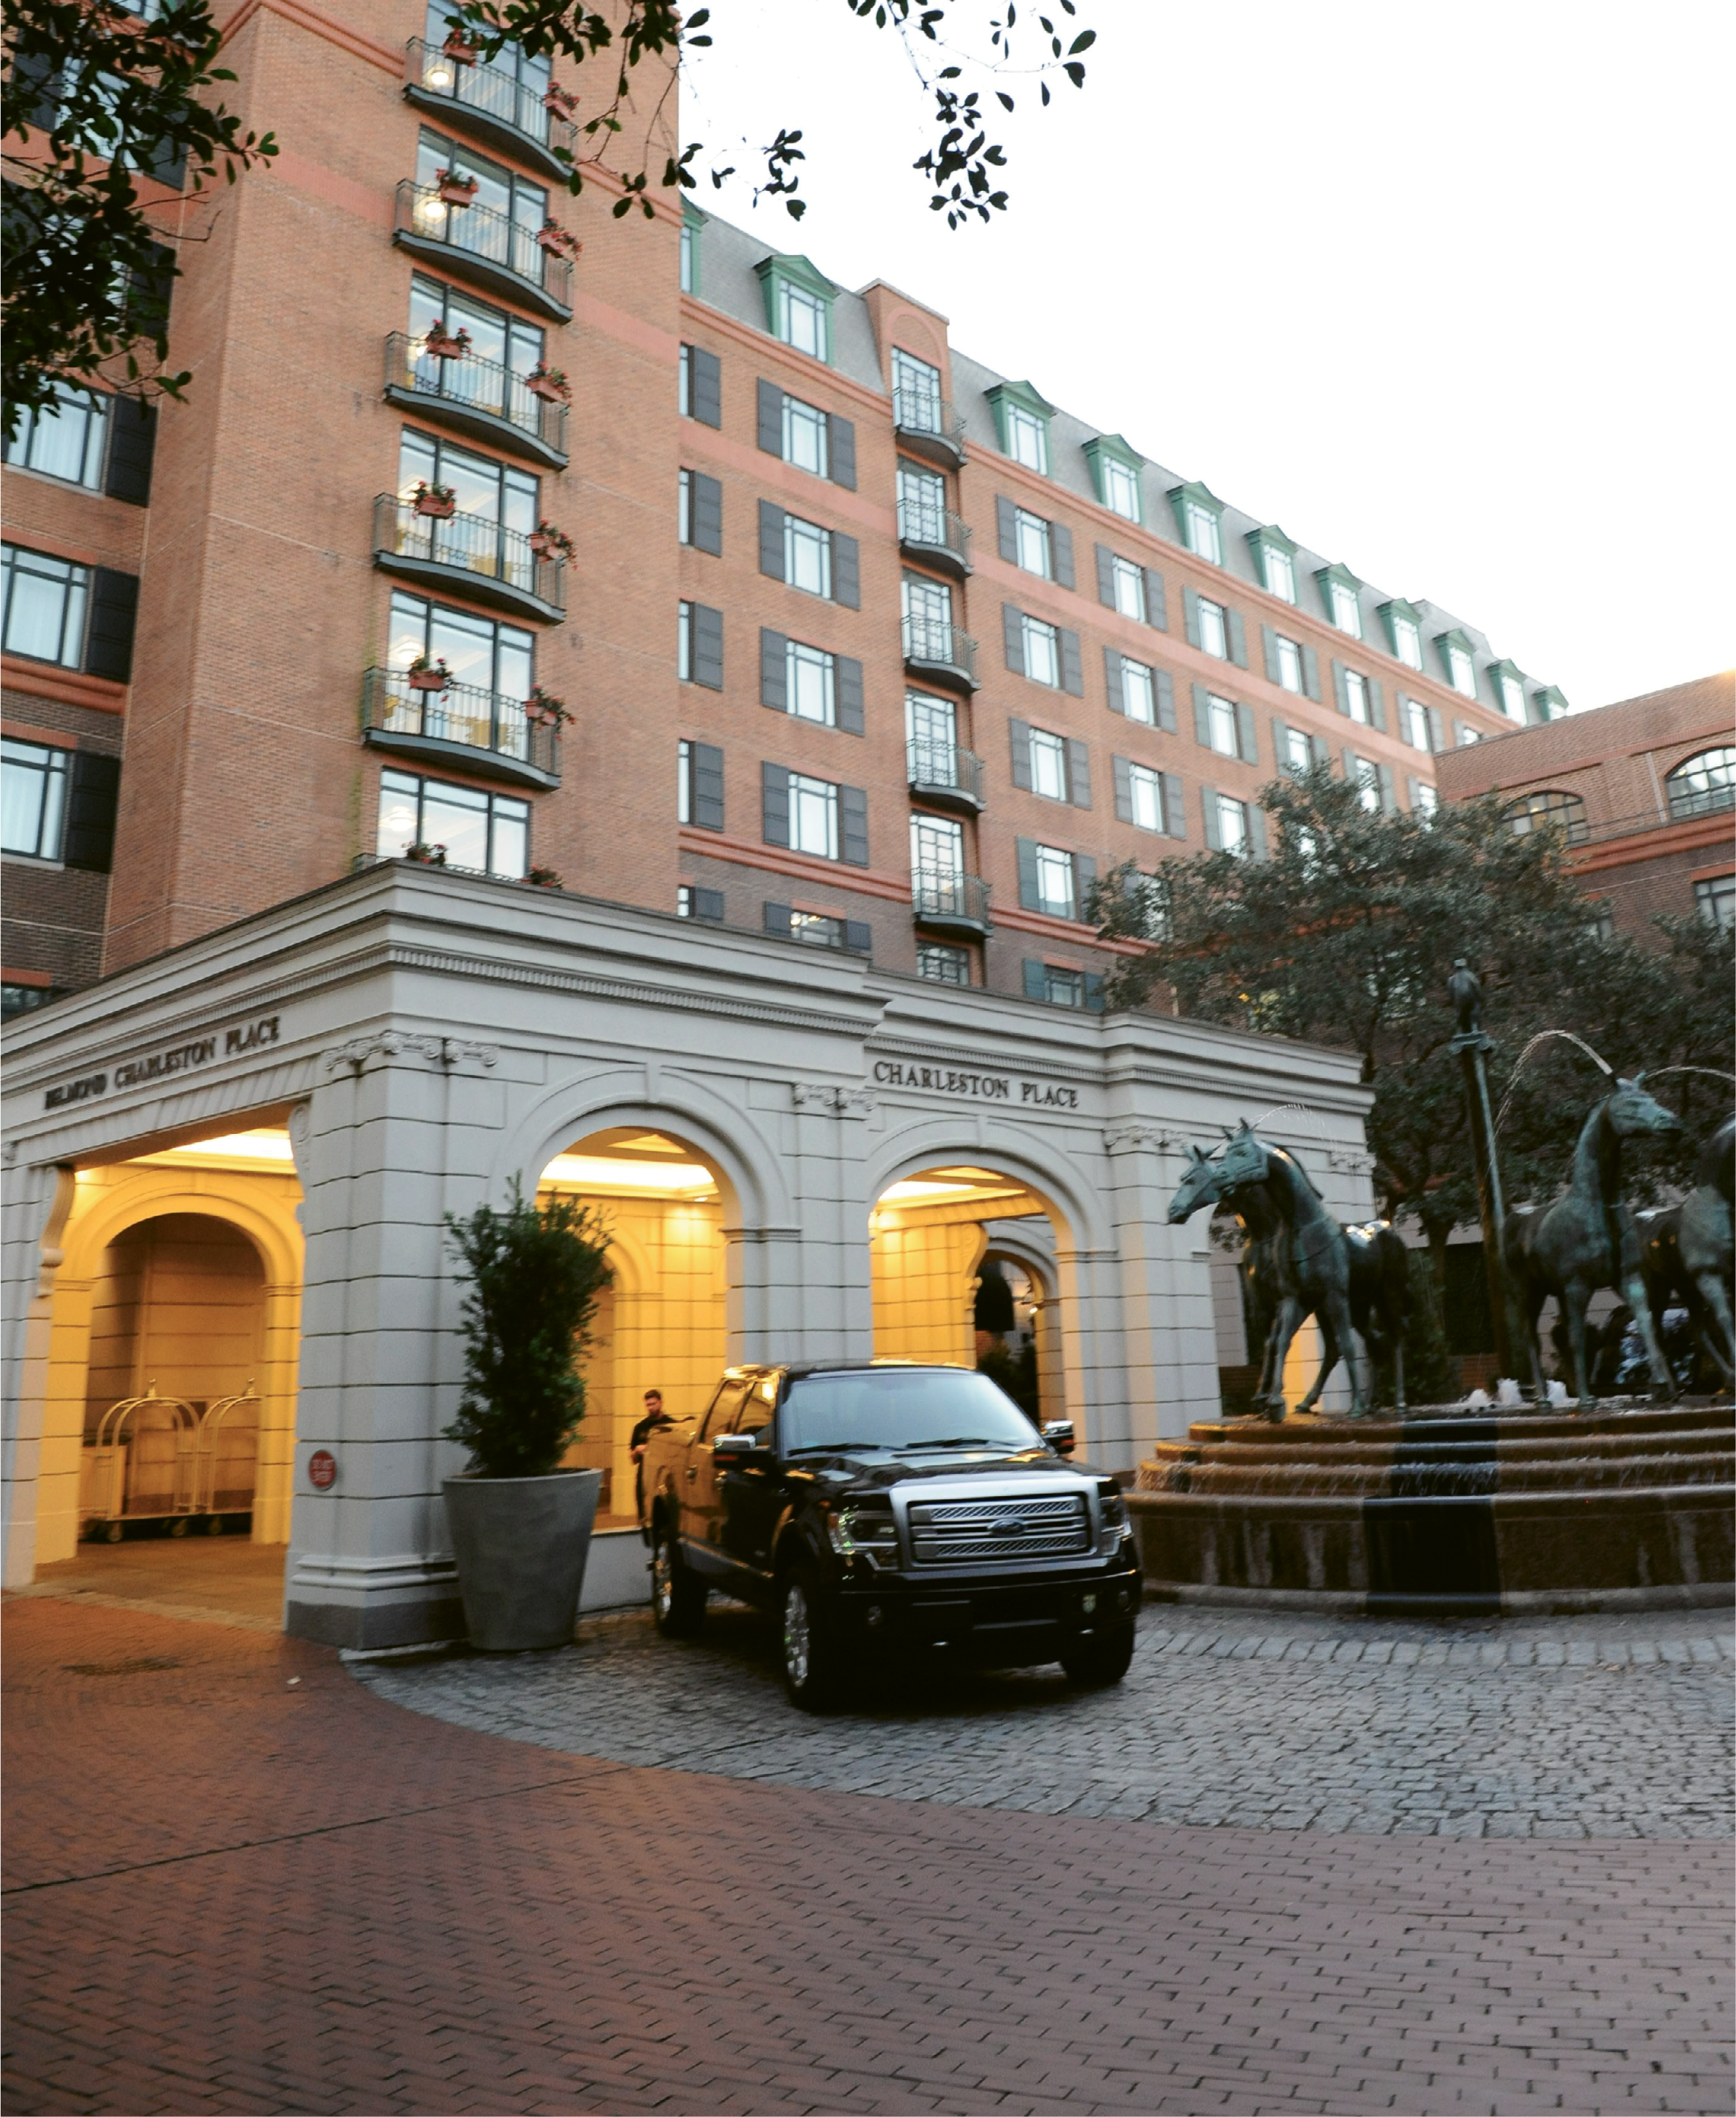 Charleston Place, now under the global Belmond brand, celebrated its 30th anniversary last year, completing renovations on all of its guest rooms as well as the Thoroughbred Club and adding more amenities, such as the new pub, Meeting at Market.